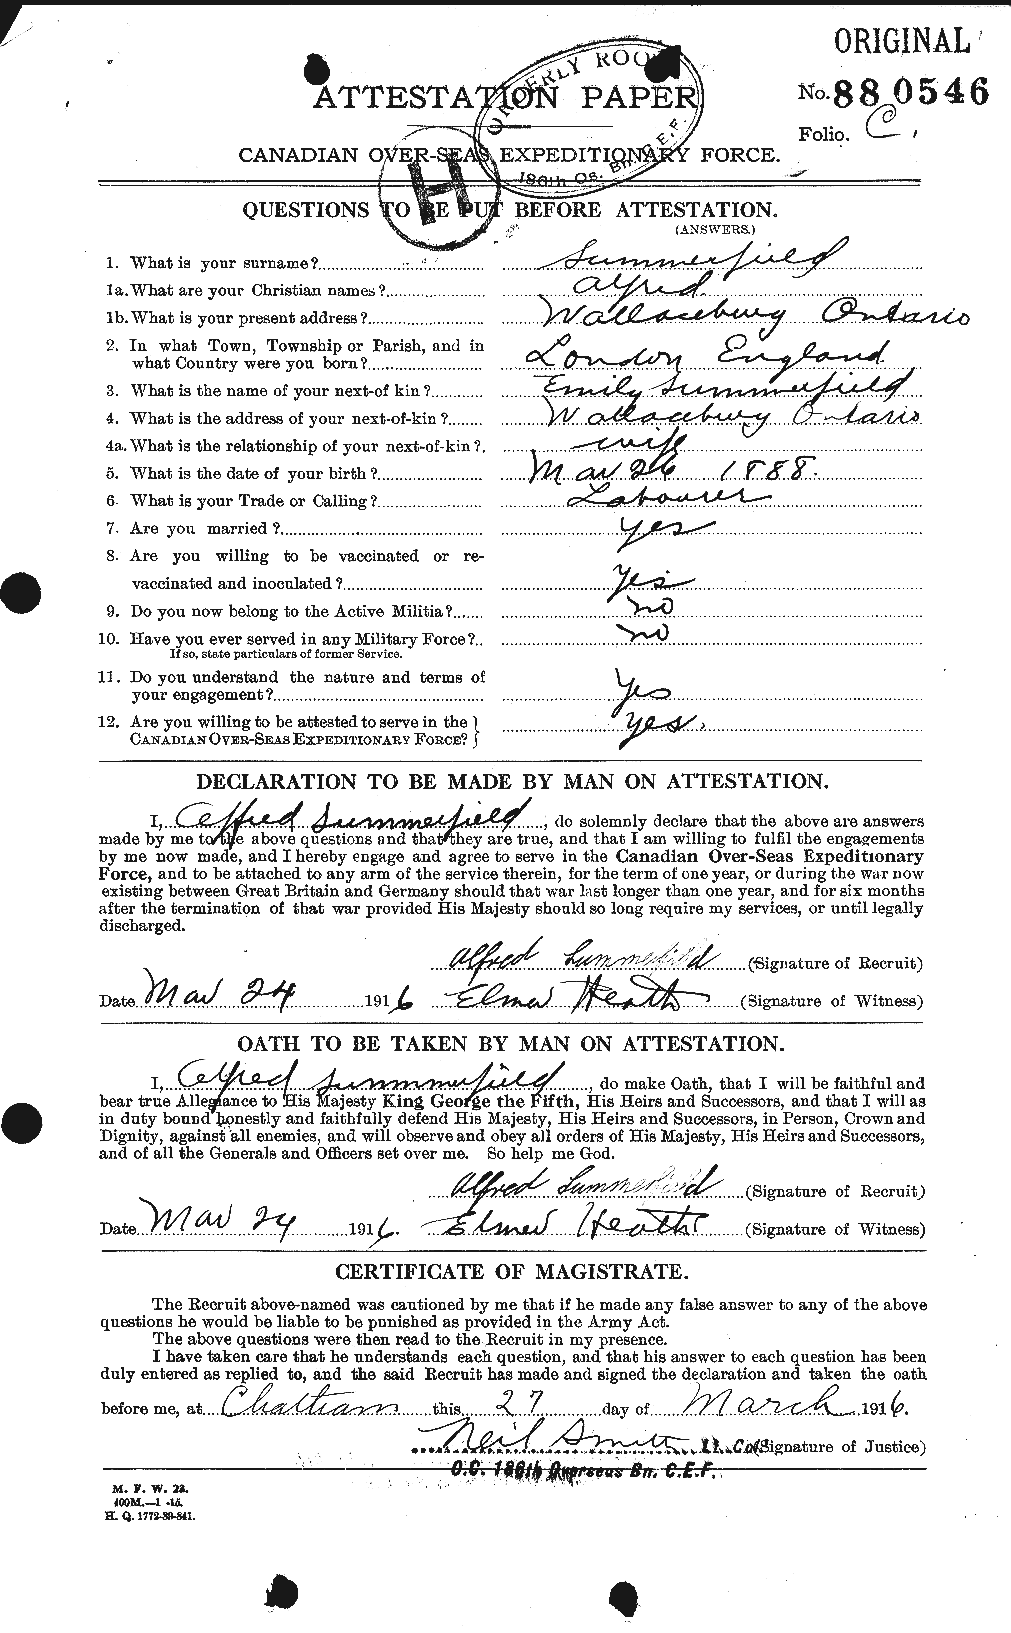 Personnel Records of the First World War - CEF 124052a